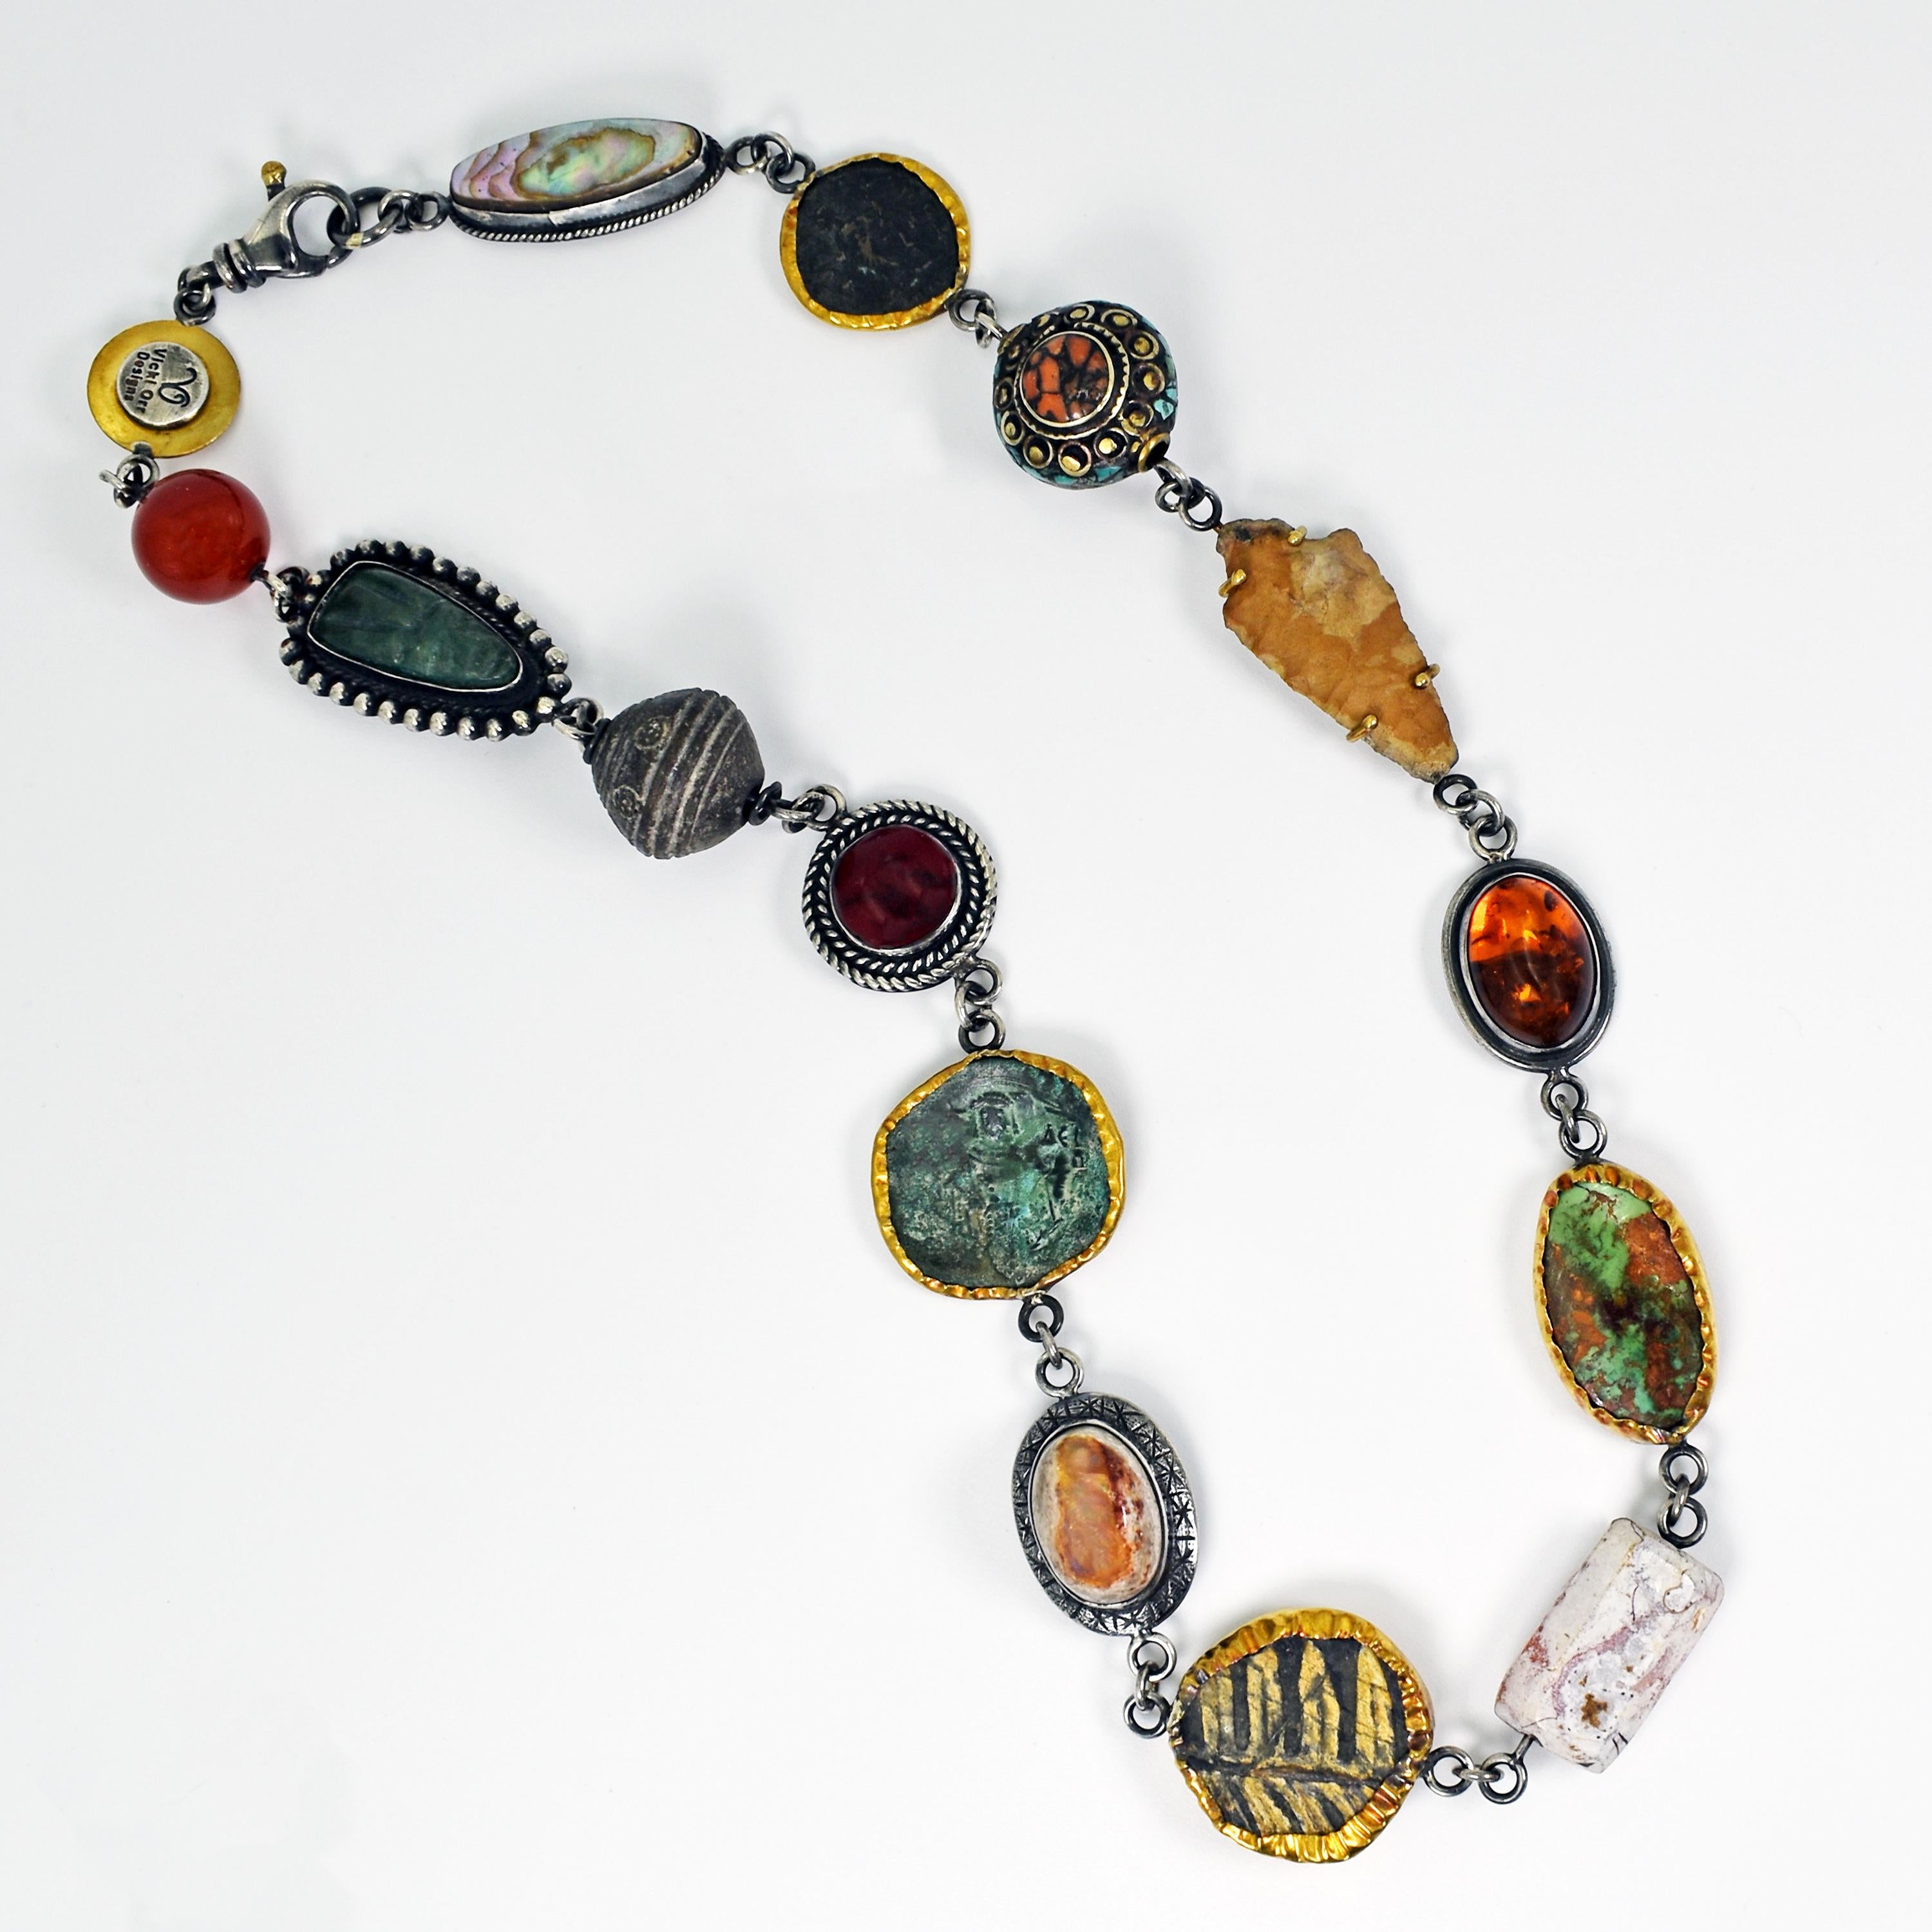 Unique statement necklace featuring a variety of ancient artifacts and gemstones including Mother-of-Pearl, ancient Roman coin, antique Turquoise & Coral Tibetan bead, arrowhead, Amber, King Manassa Turquoise, ancient Agate bead, plant fossil,